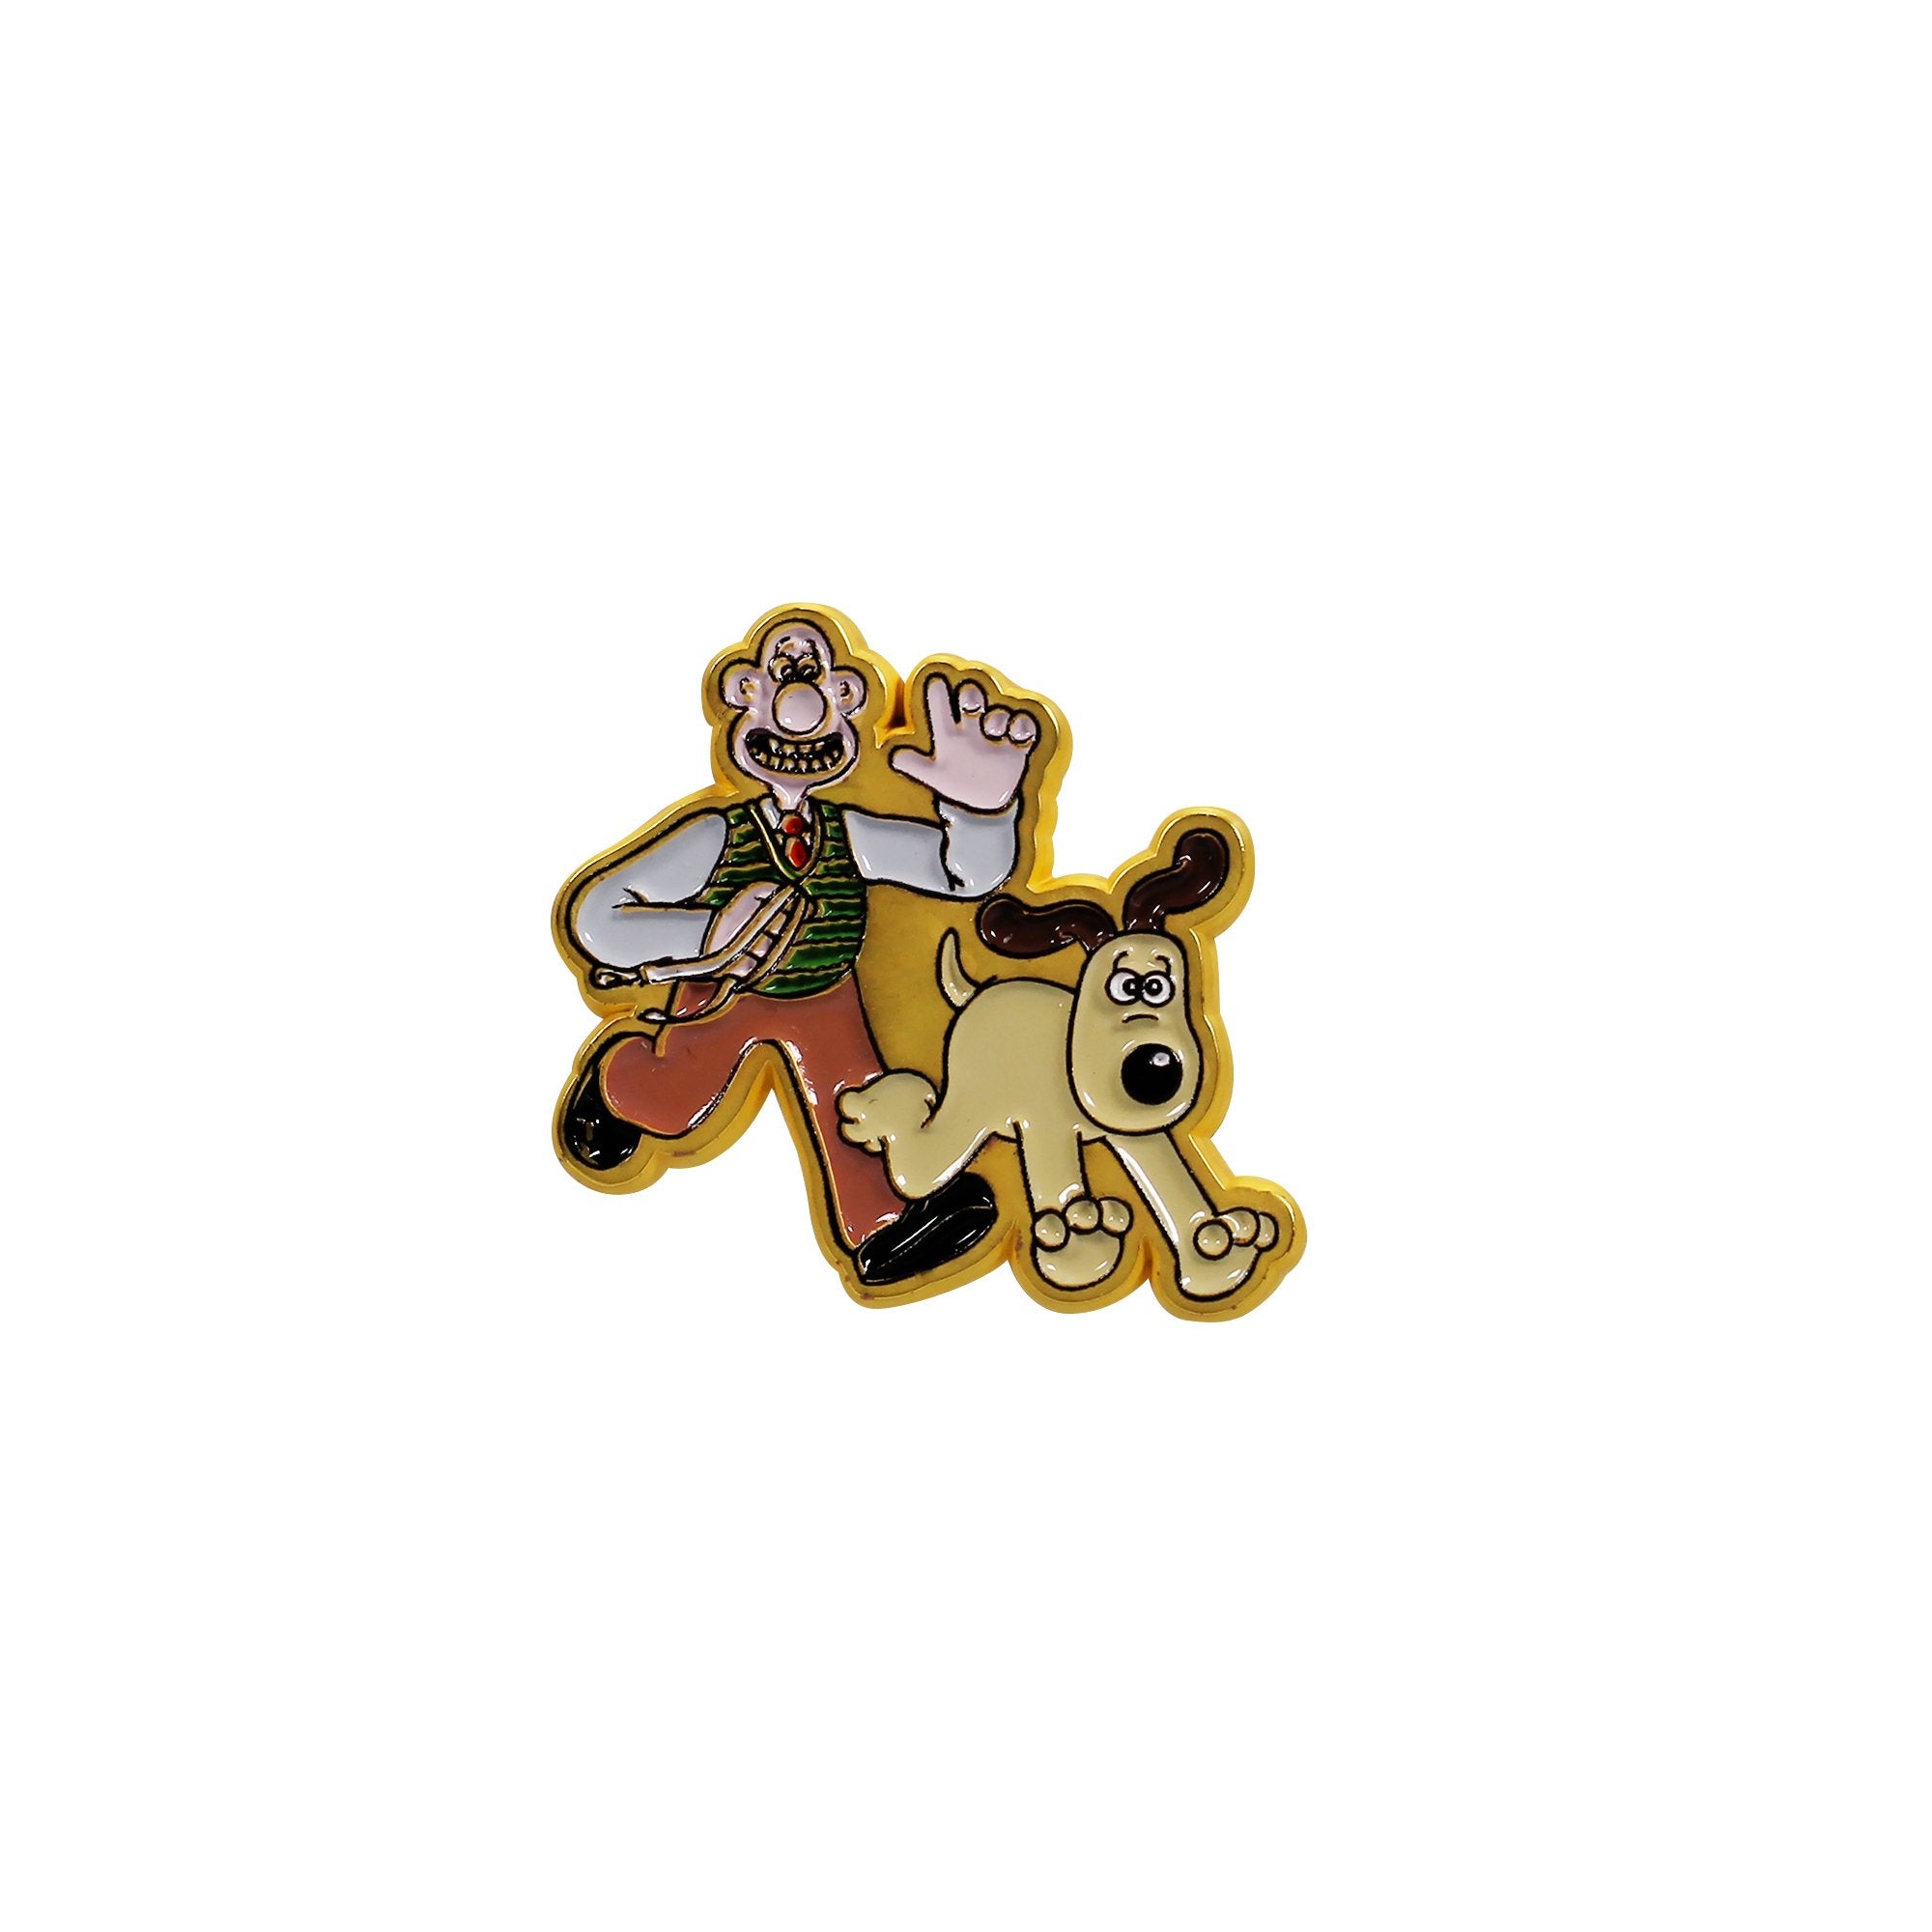 Pin Badge - Wallace & Gromit (Wallace & Gromit)